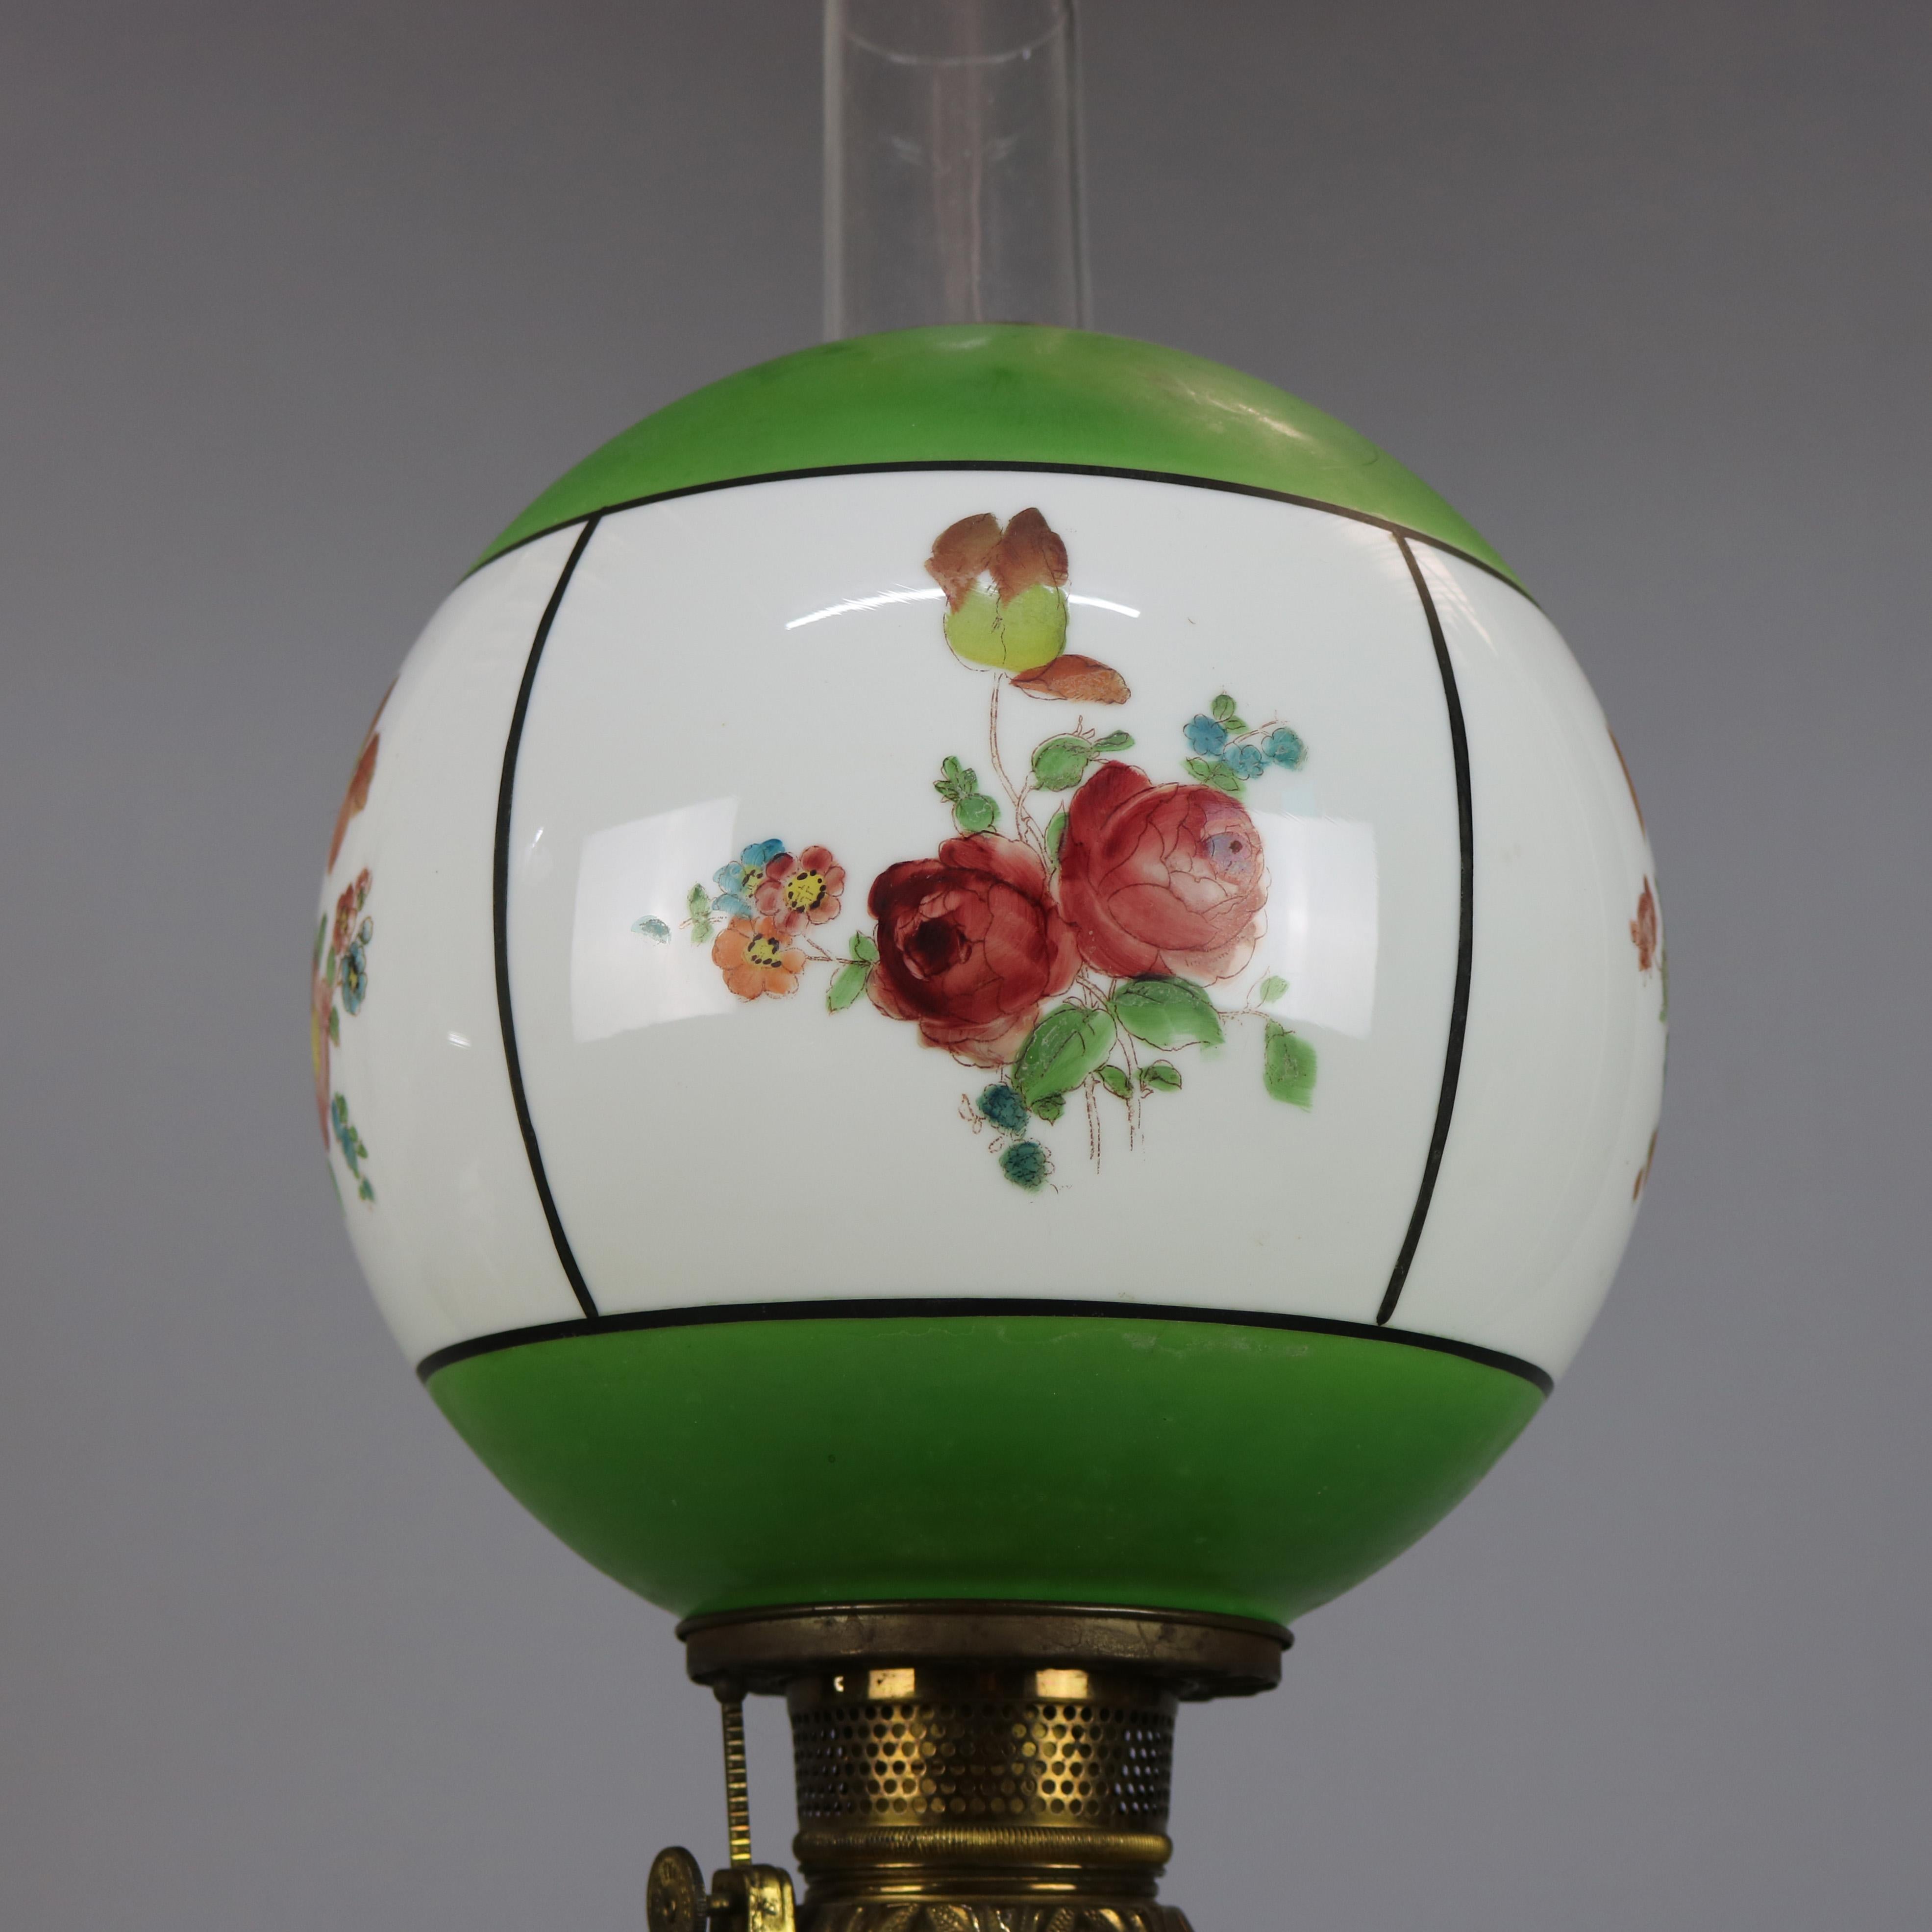 An antique Victorian gone-with-the-wind electrified kerosene banquet parlor lamp by Fostoria offers glass shade and base with hand painted floral reserves, raised on pierced gilt metal foot, electrified, FGCO mark on base, circa 1890

Measures: